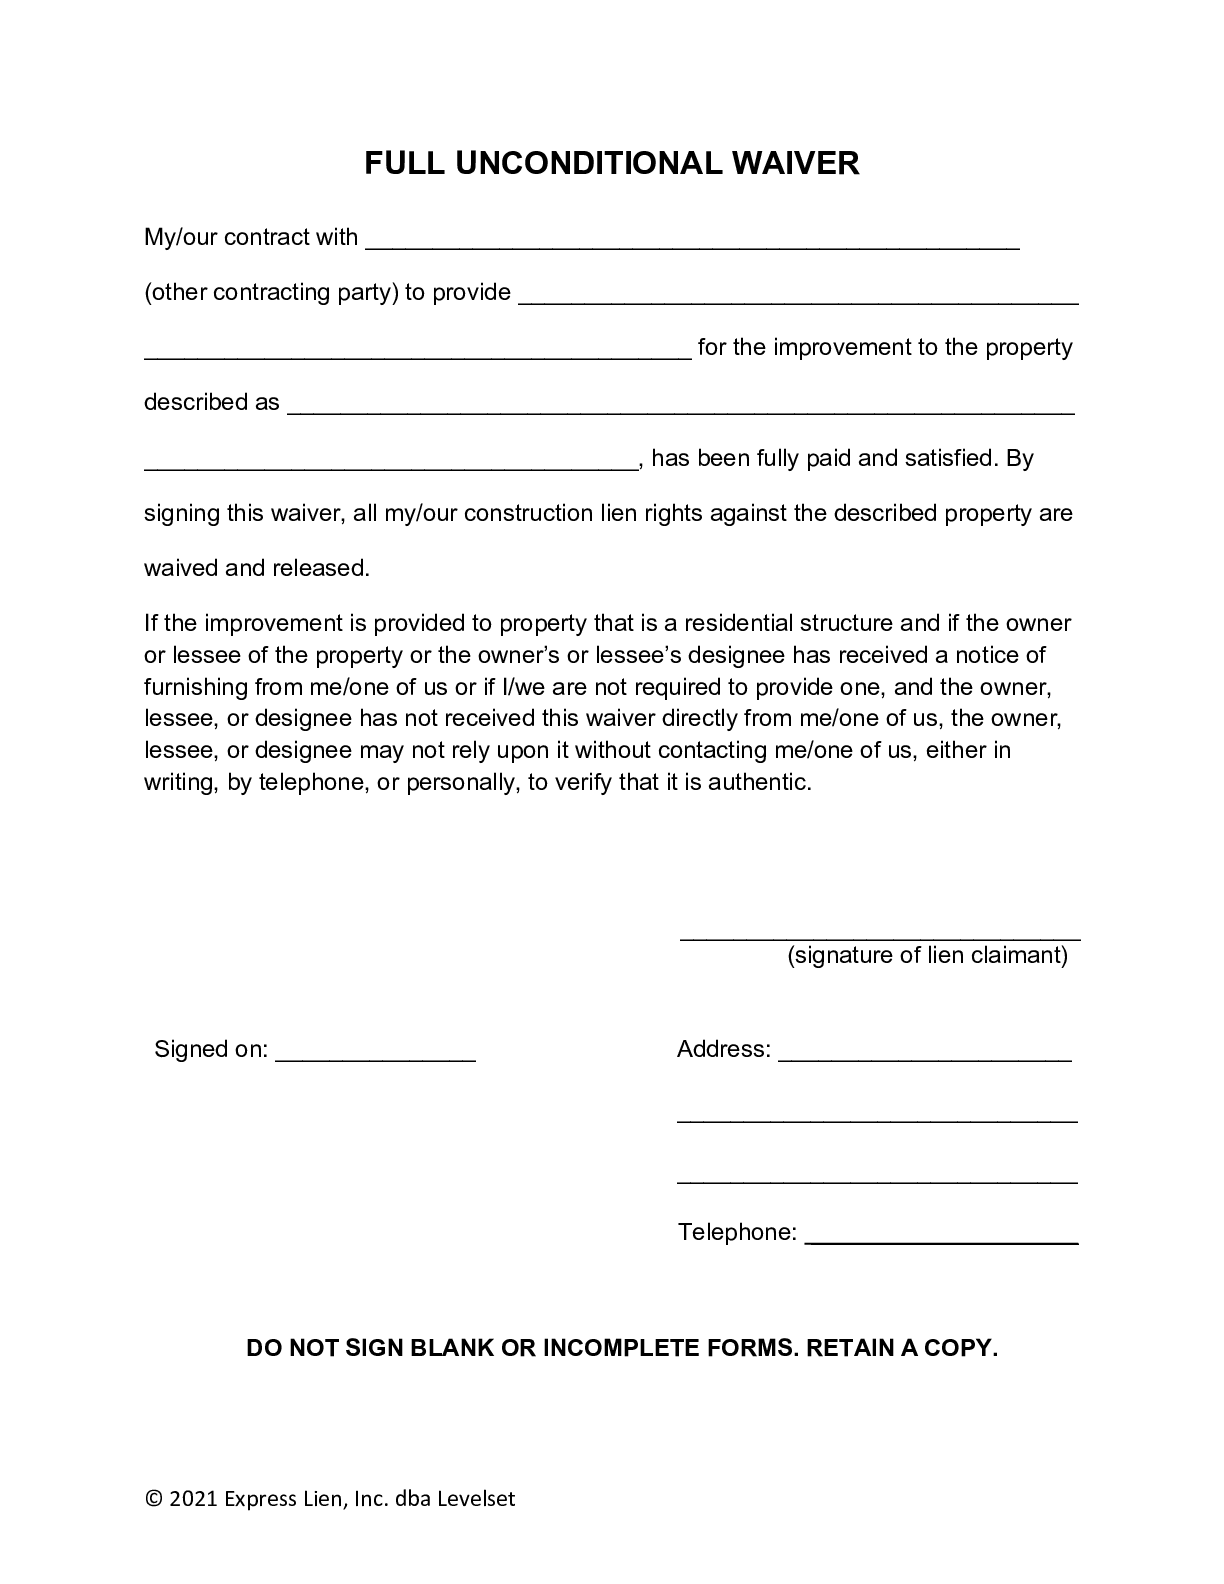 Michigan Final Unconditional Lien Waiver Form - free from